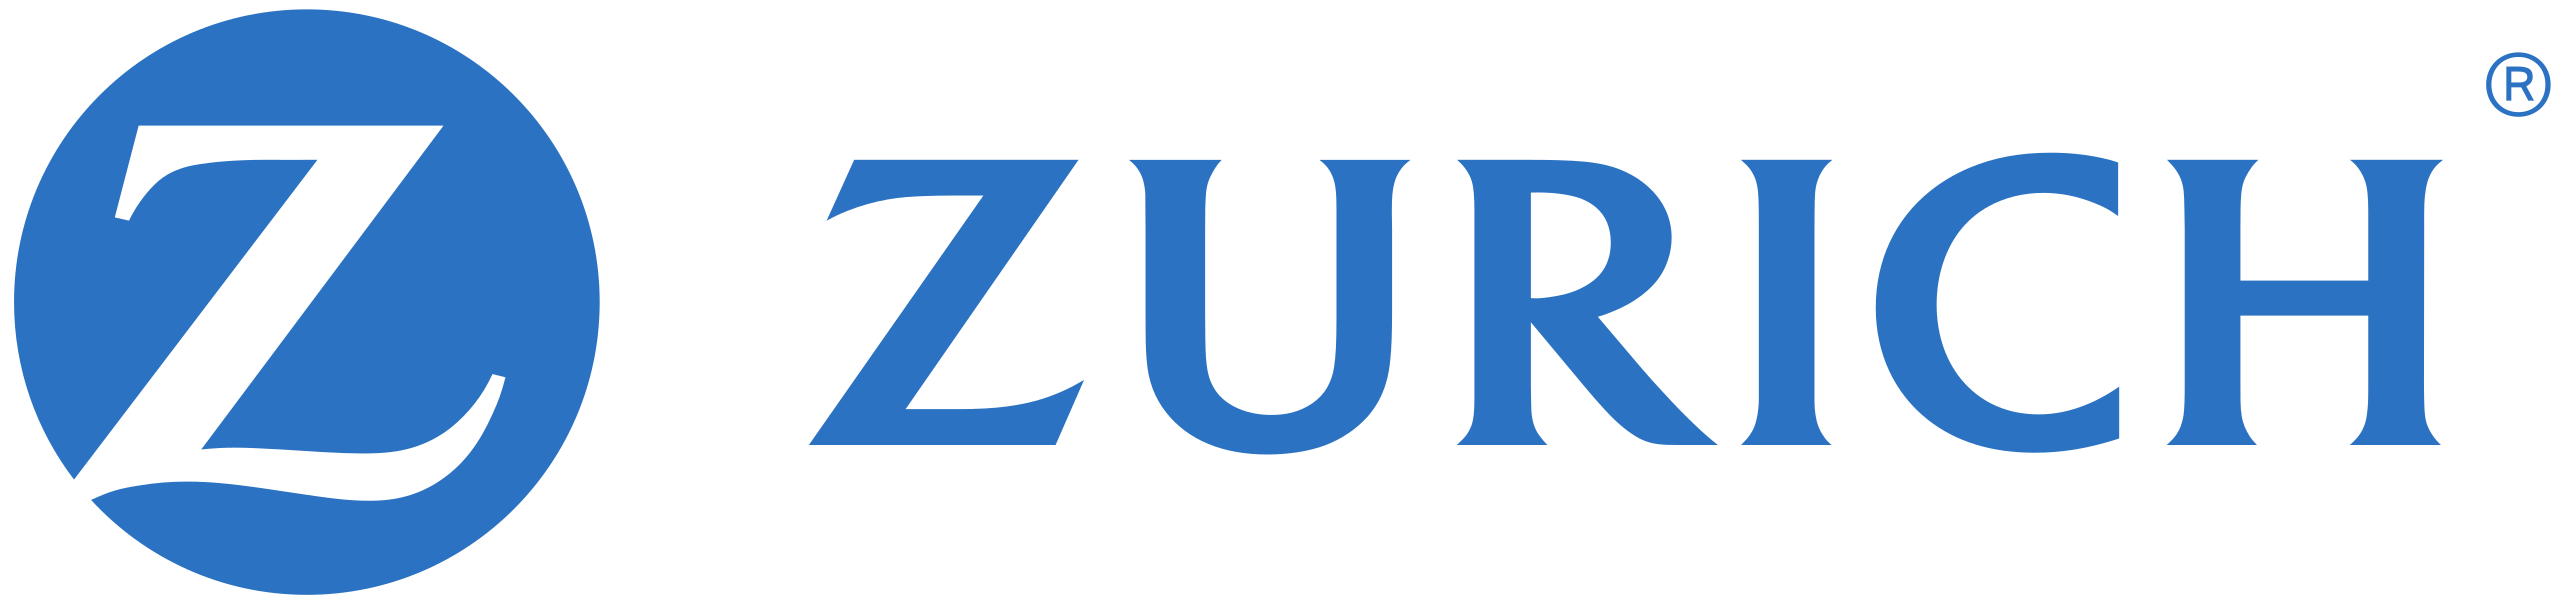 Zurich Insurance liked their buying experience with the Stageset sales enablement tool